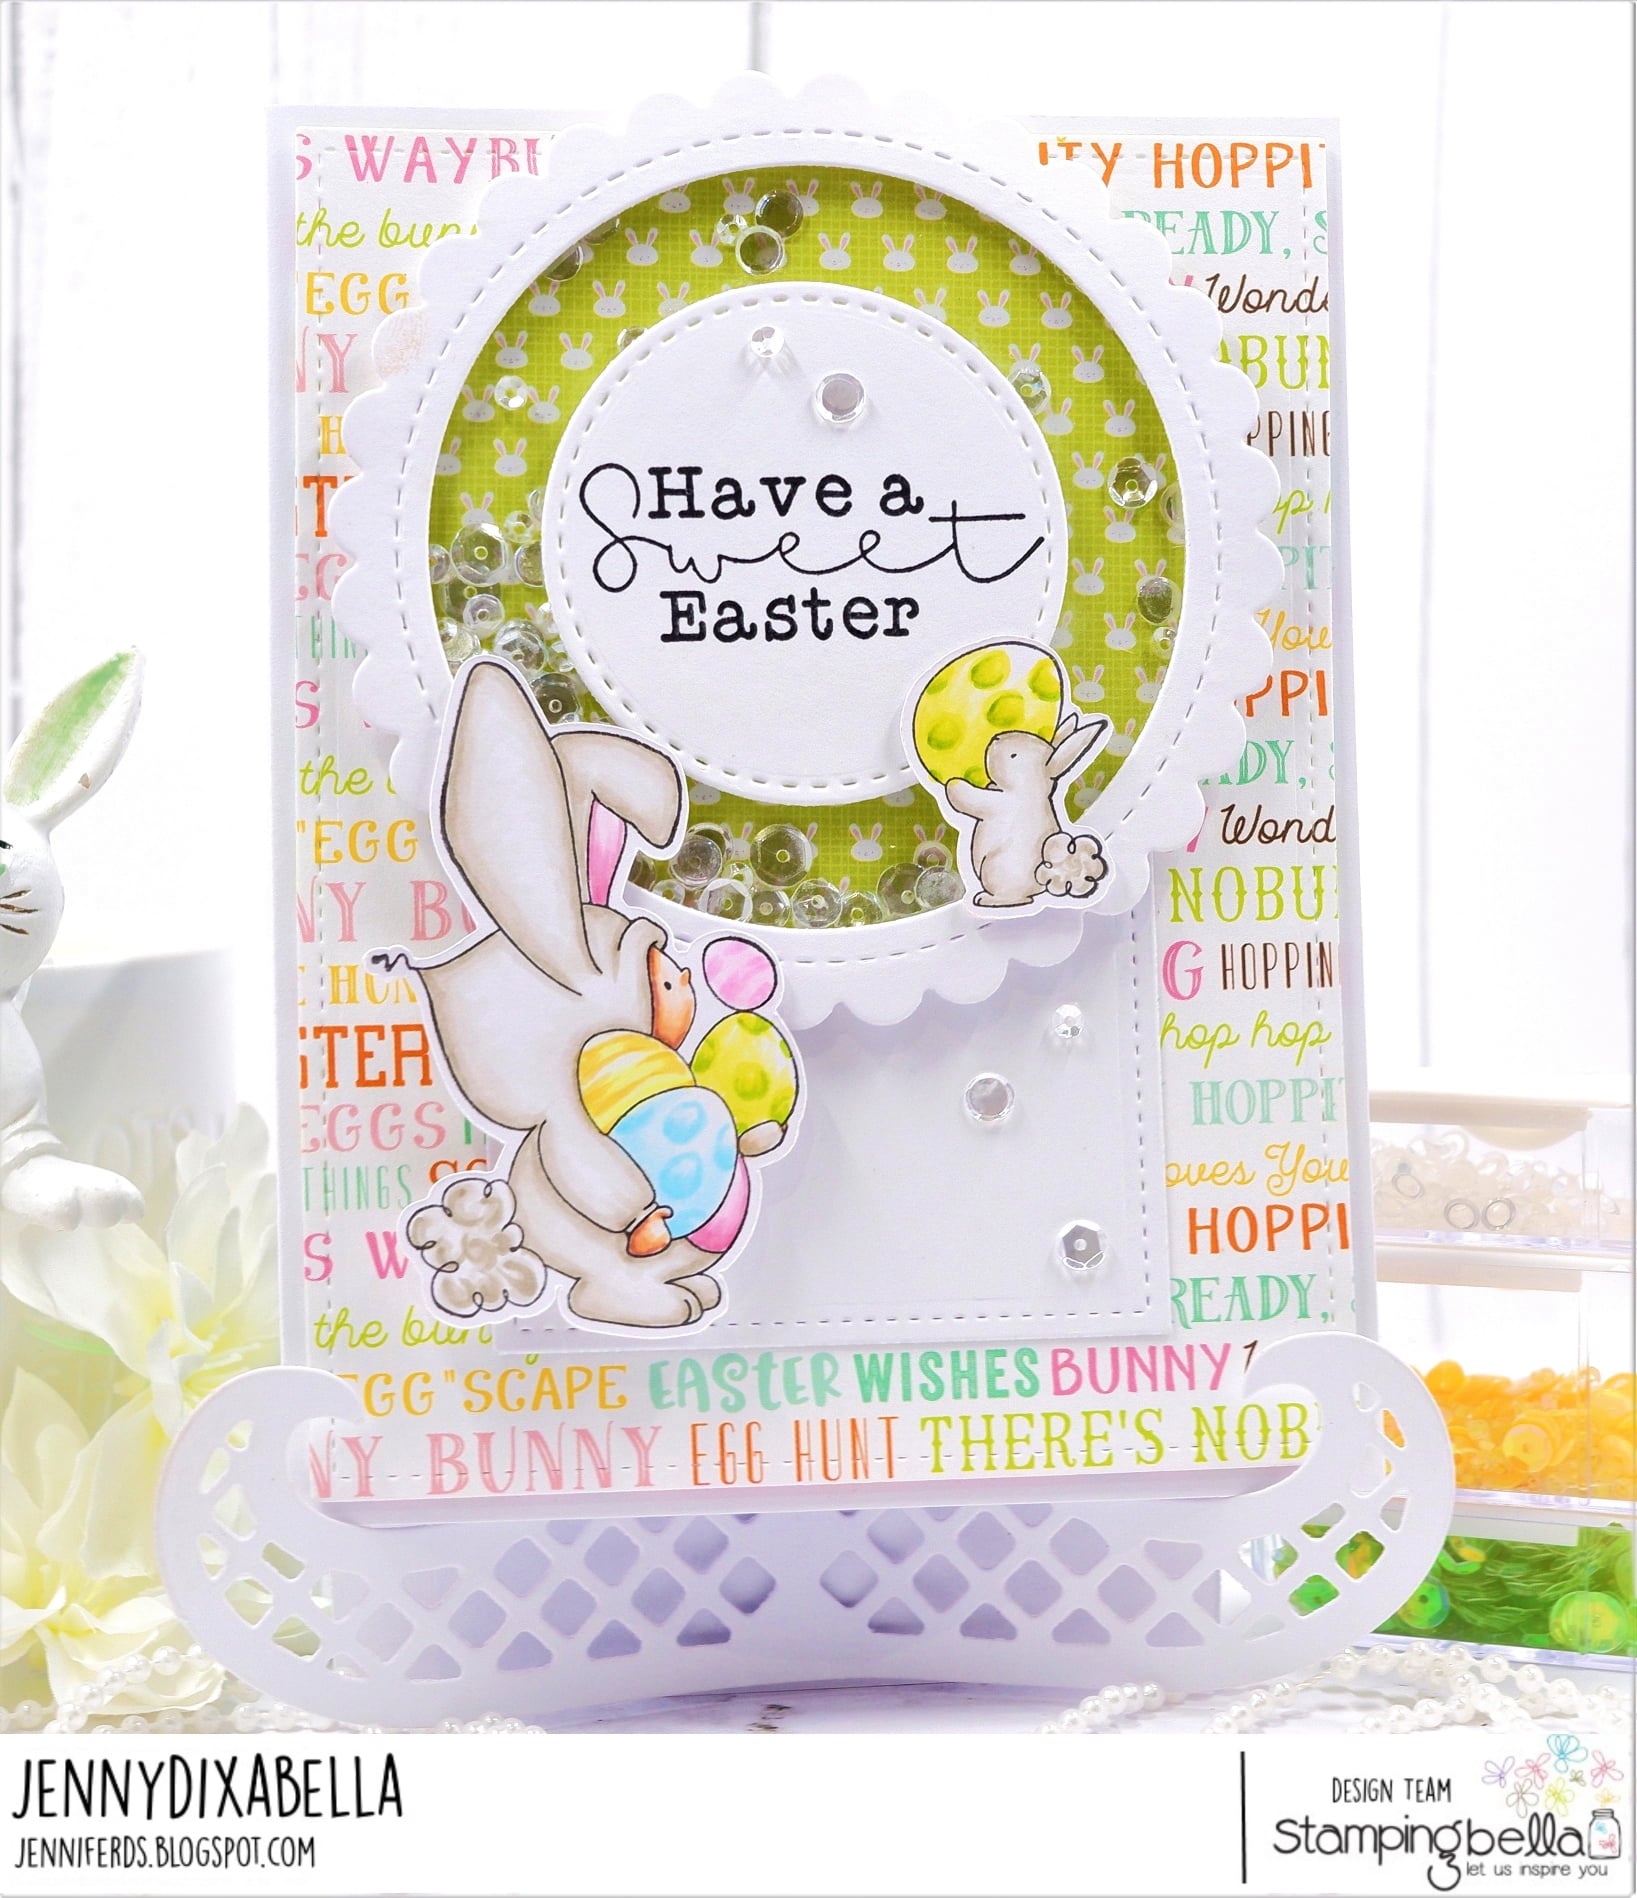 www.stampingbella.com: rubber stamp used : BUNDLE GIRL BUNNY card by Jenny Dix